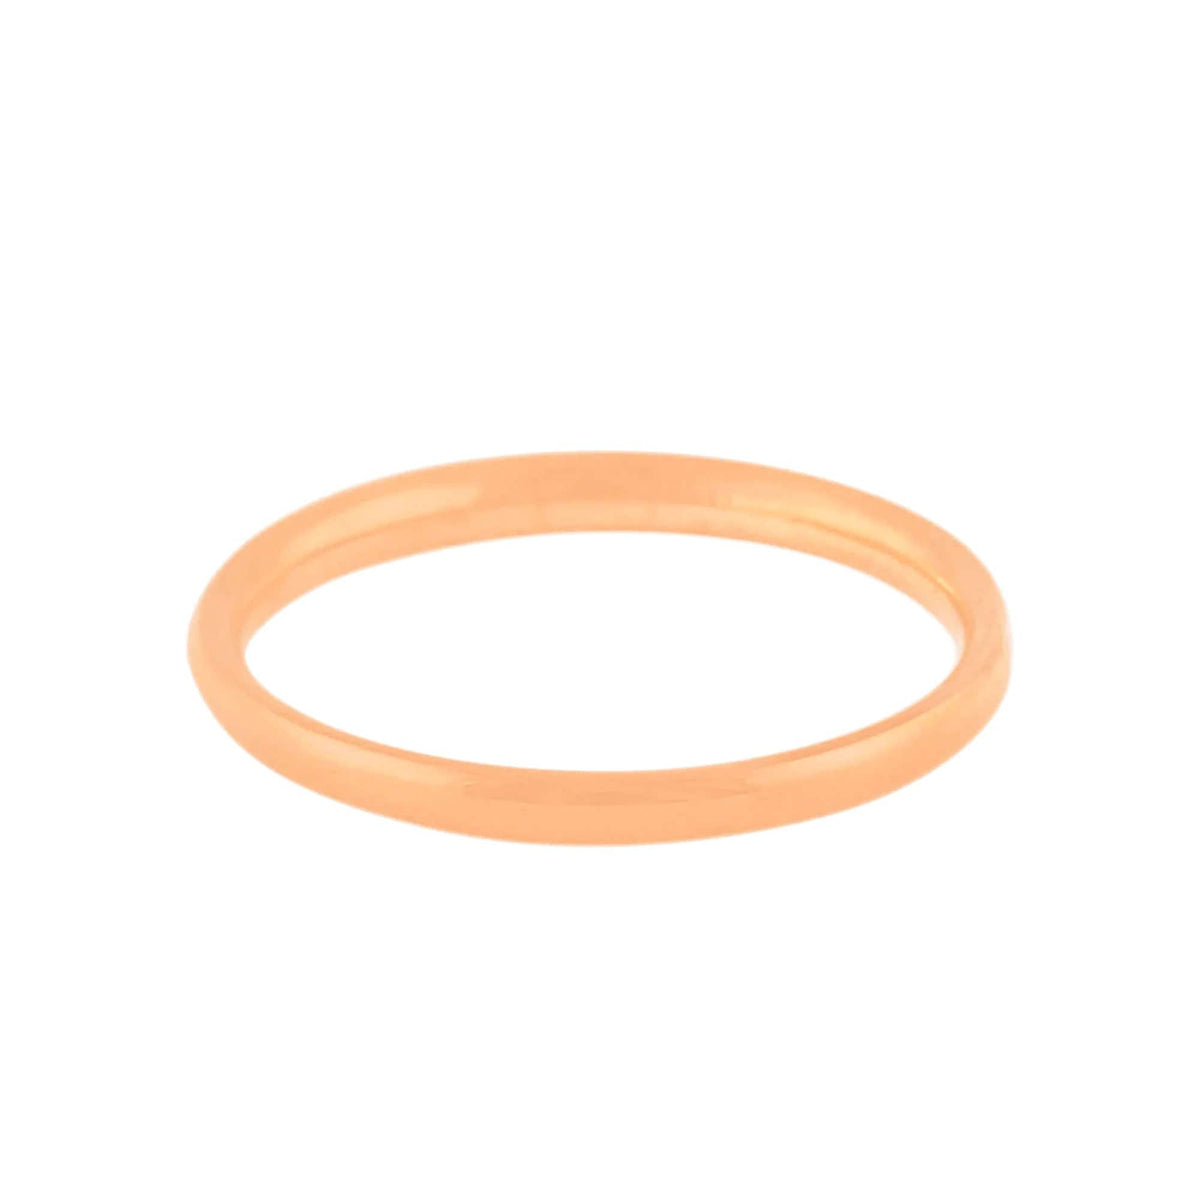 BohoMoon Stainless Steel Plain Band Ring Rose Gold / US 5 / UK J / EUR 49 (x small)